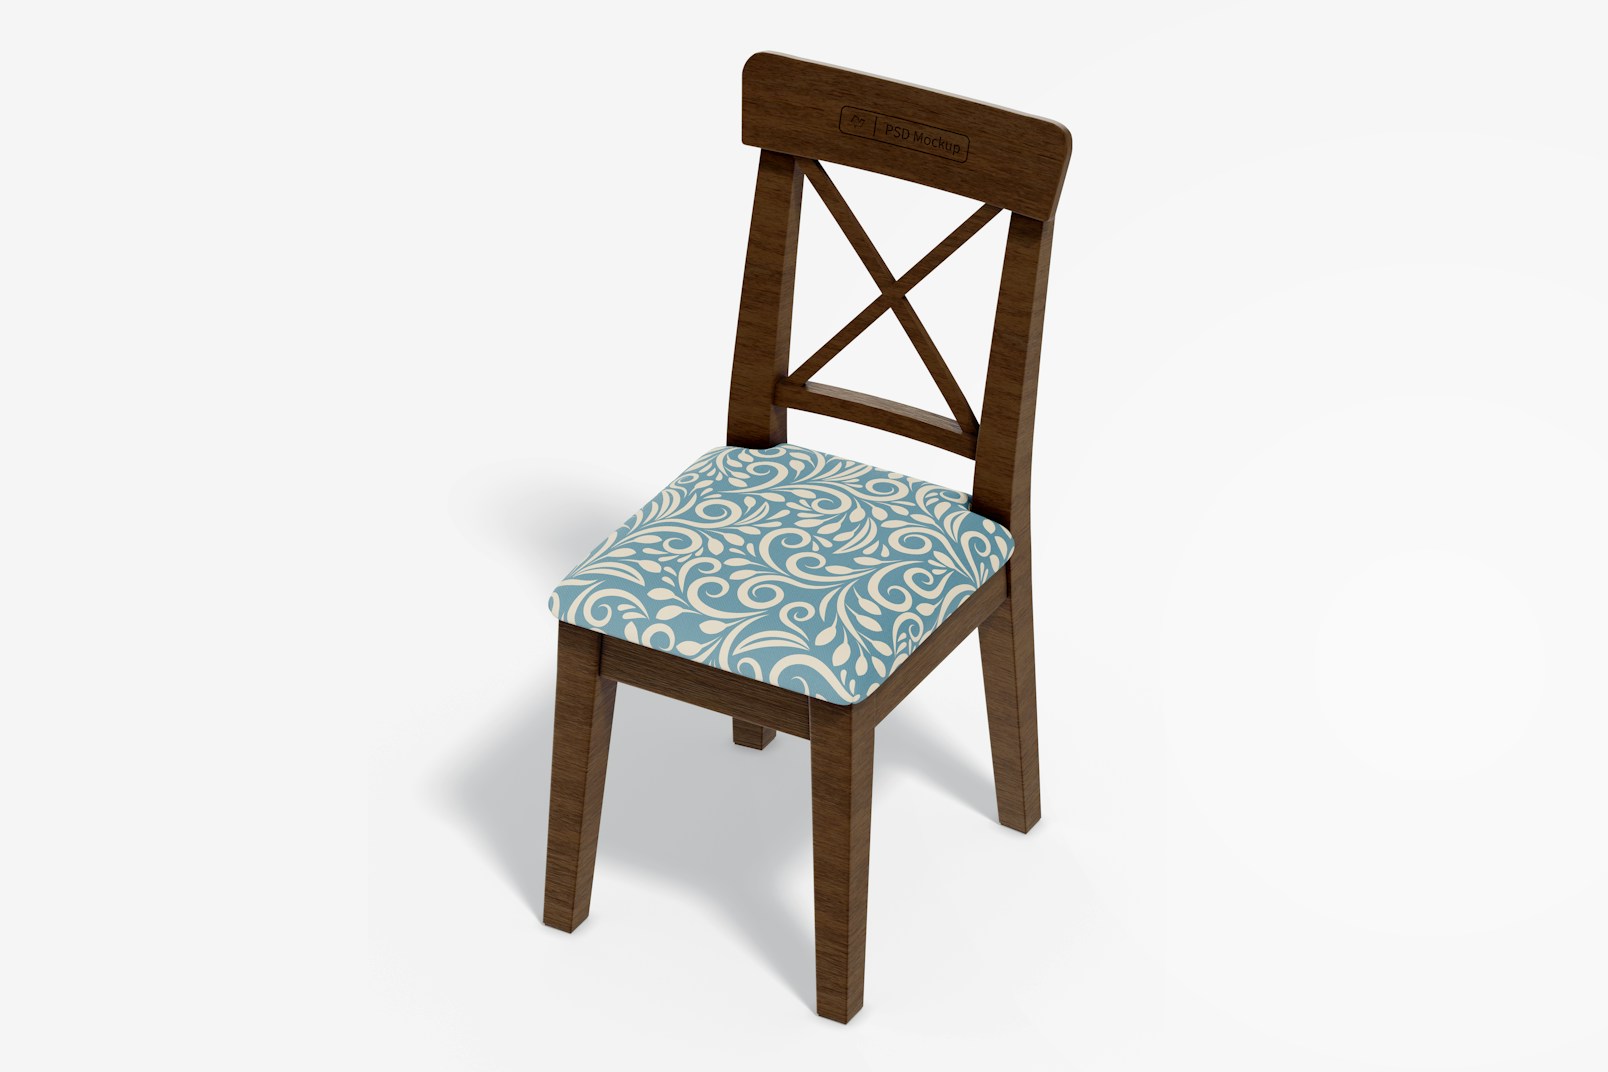 Wooden Dining Chair Mockup